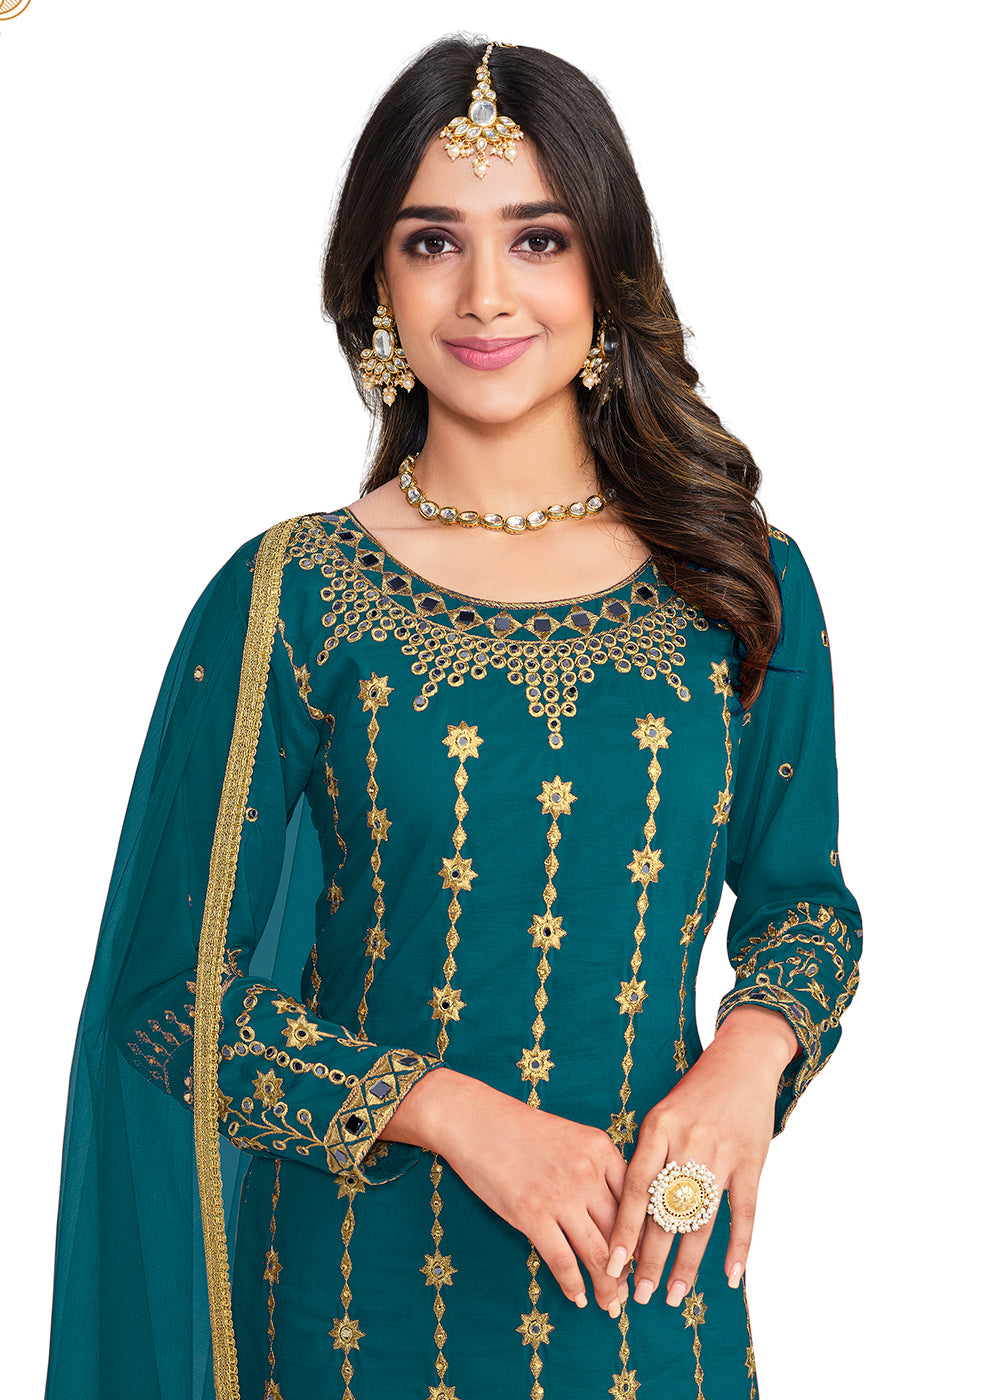 Buy Now Beautiful Mirror Work Teal Silk Festive Salwar Suit Online in USA, UK, Canada & Worldwide at Empress Clothing. 